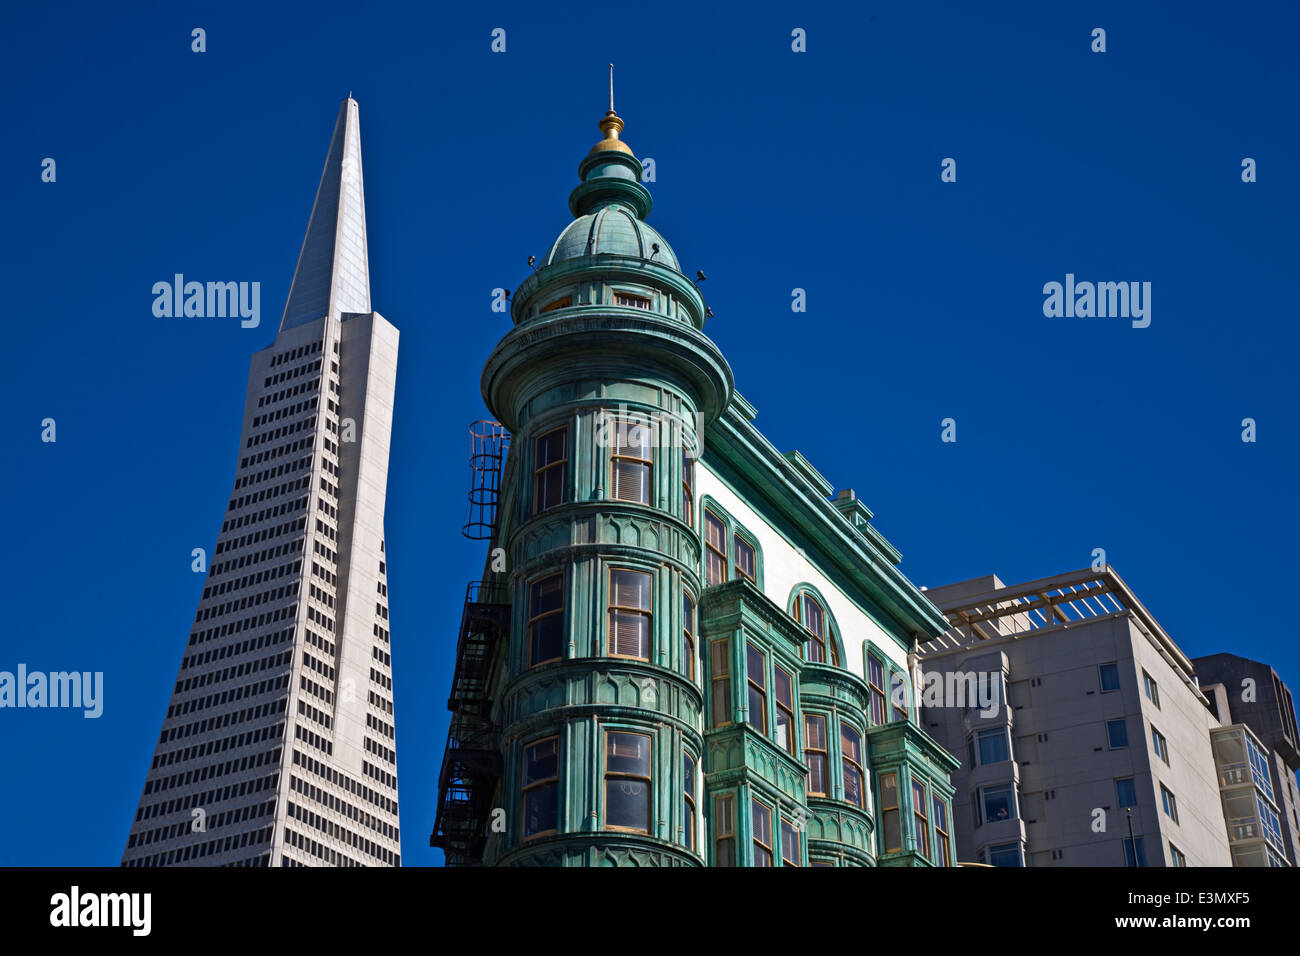 NORTH BEACH and the TRANSAMERICA BUILDING which was designed by architect William Pereira - SAN FRANCISCO, CALIFORNIA Stock Photo